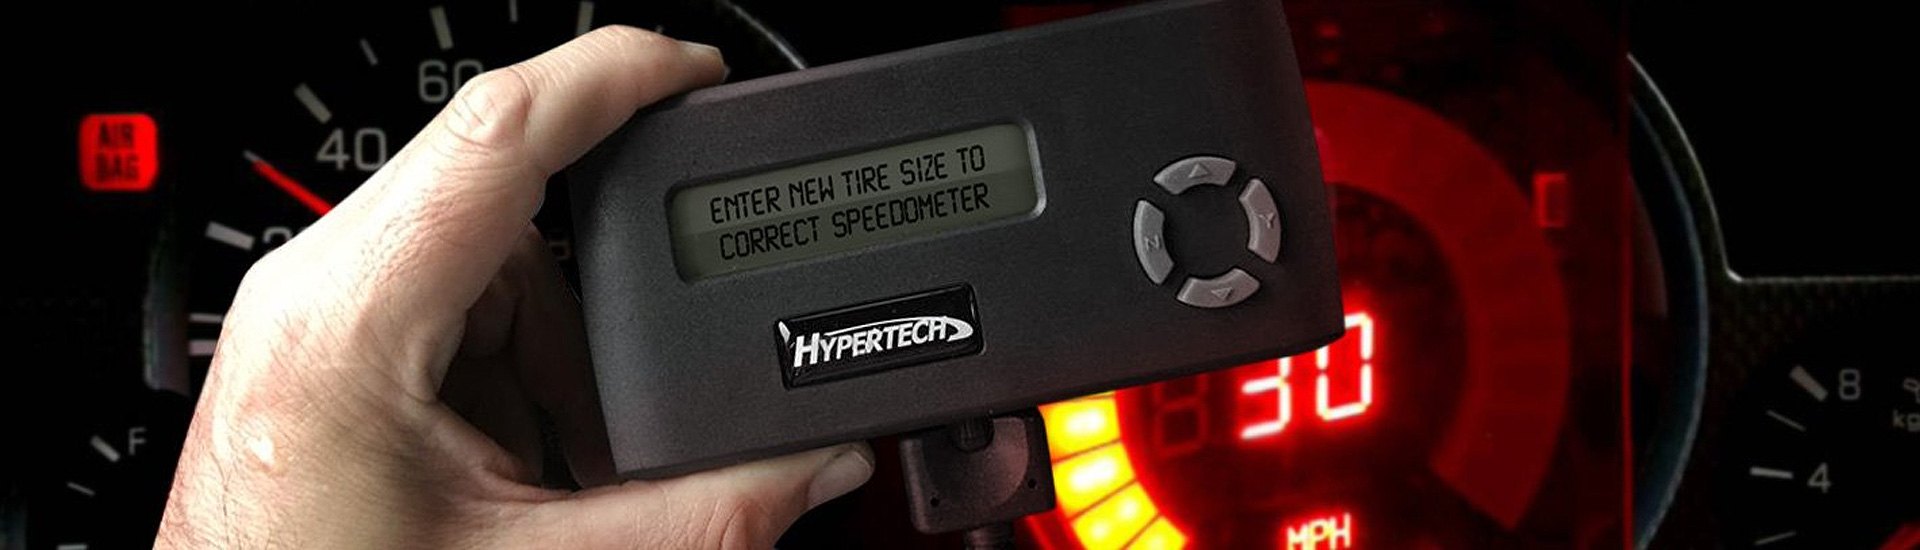 Speedo Calibrators and Tranny Controllers Let You Re-Engineer Your Ride